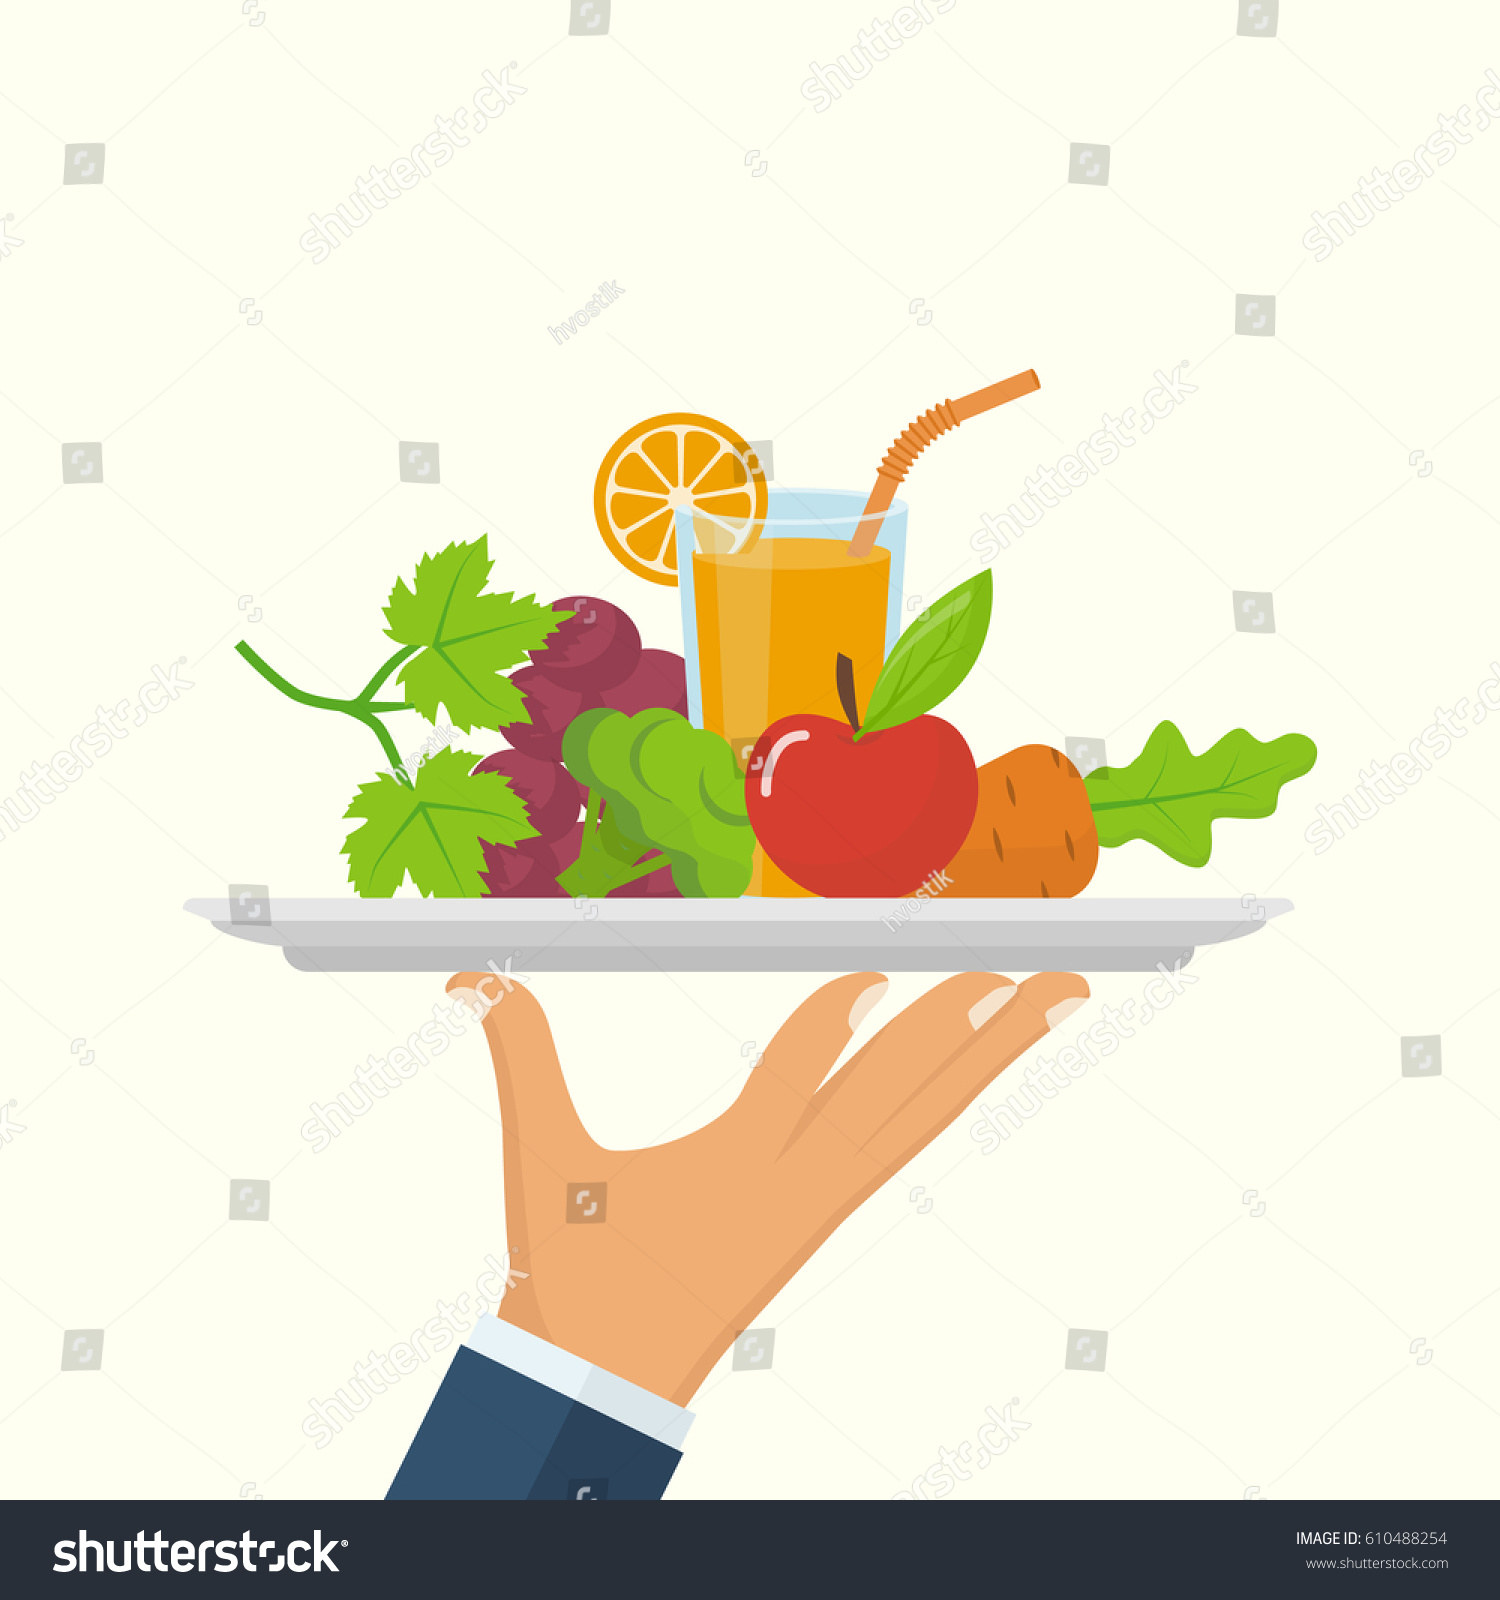 Healthy food concept. Man holds a tray of fresh vegetables, fruit and juice, symbol of a healthy diet. Veggie food, eat vitamins. Vector illustration flat design. Isolated on white background. #610488254